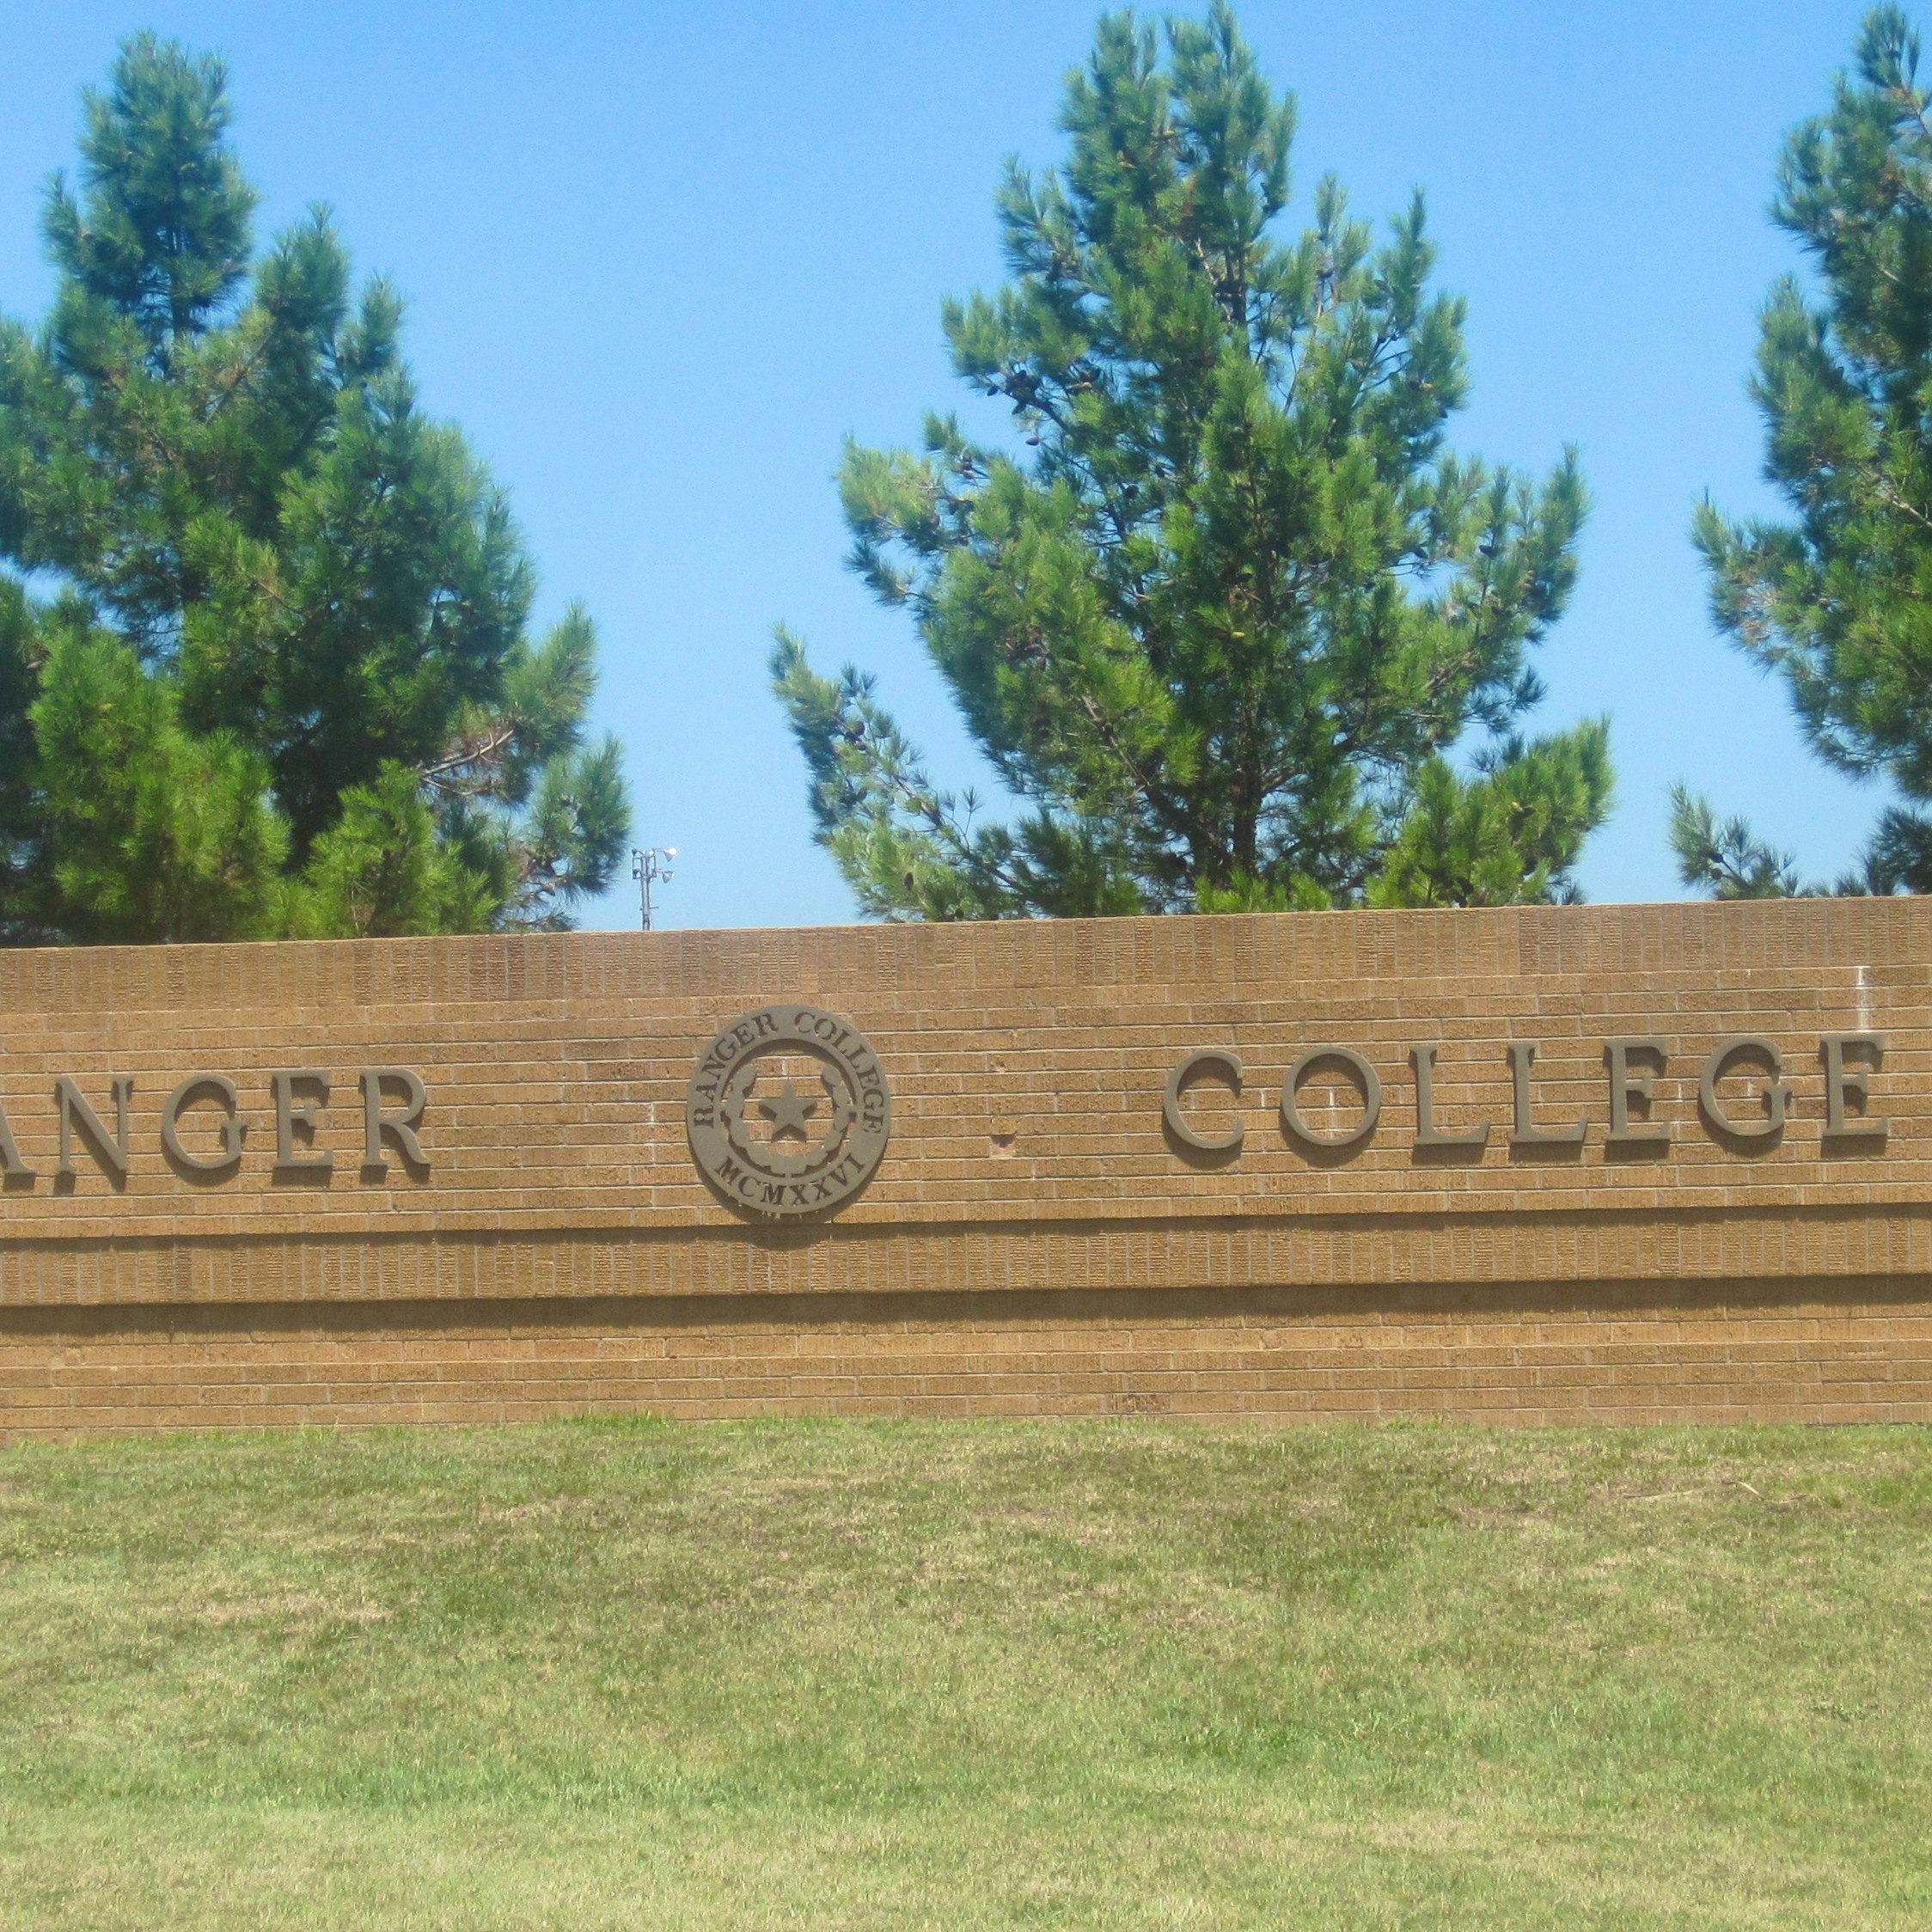 Colleges In Stephenville Tx MeaningKosh